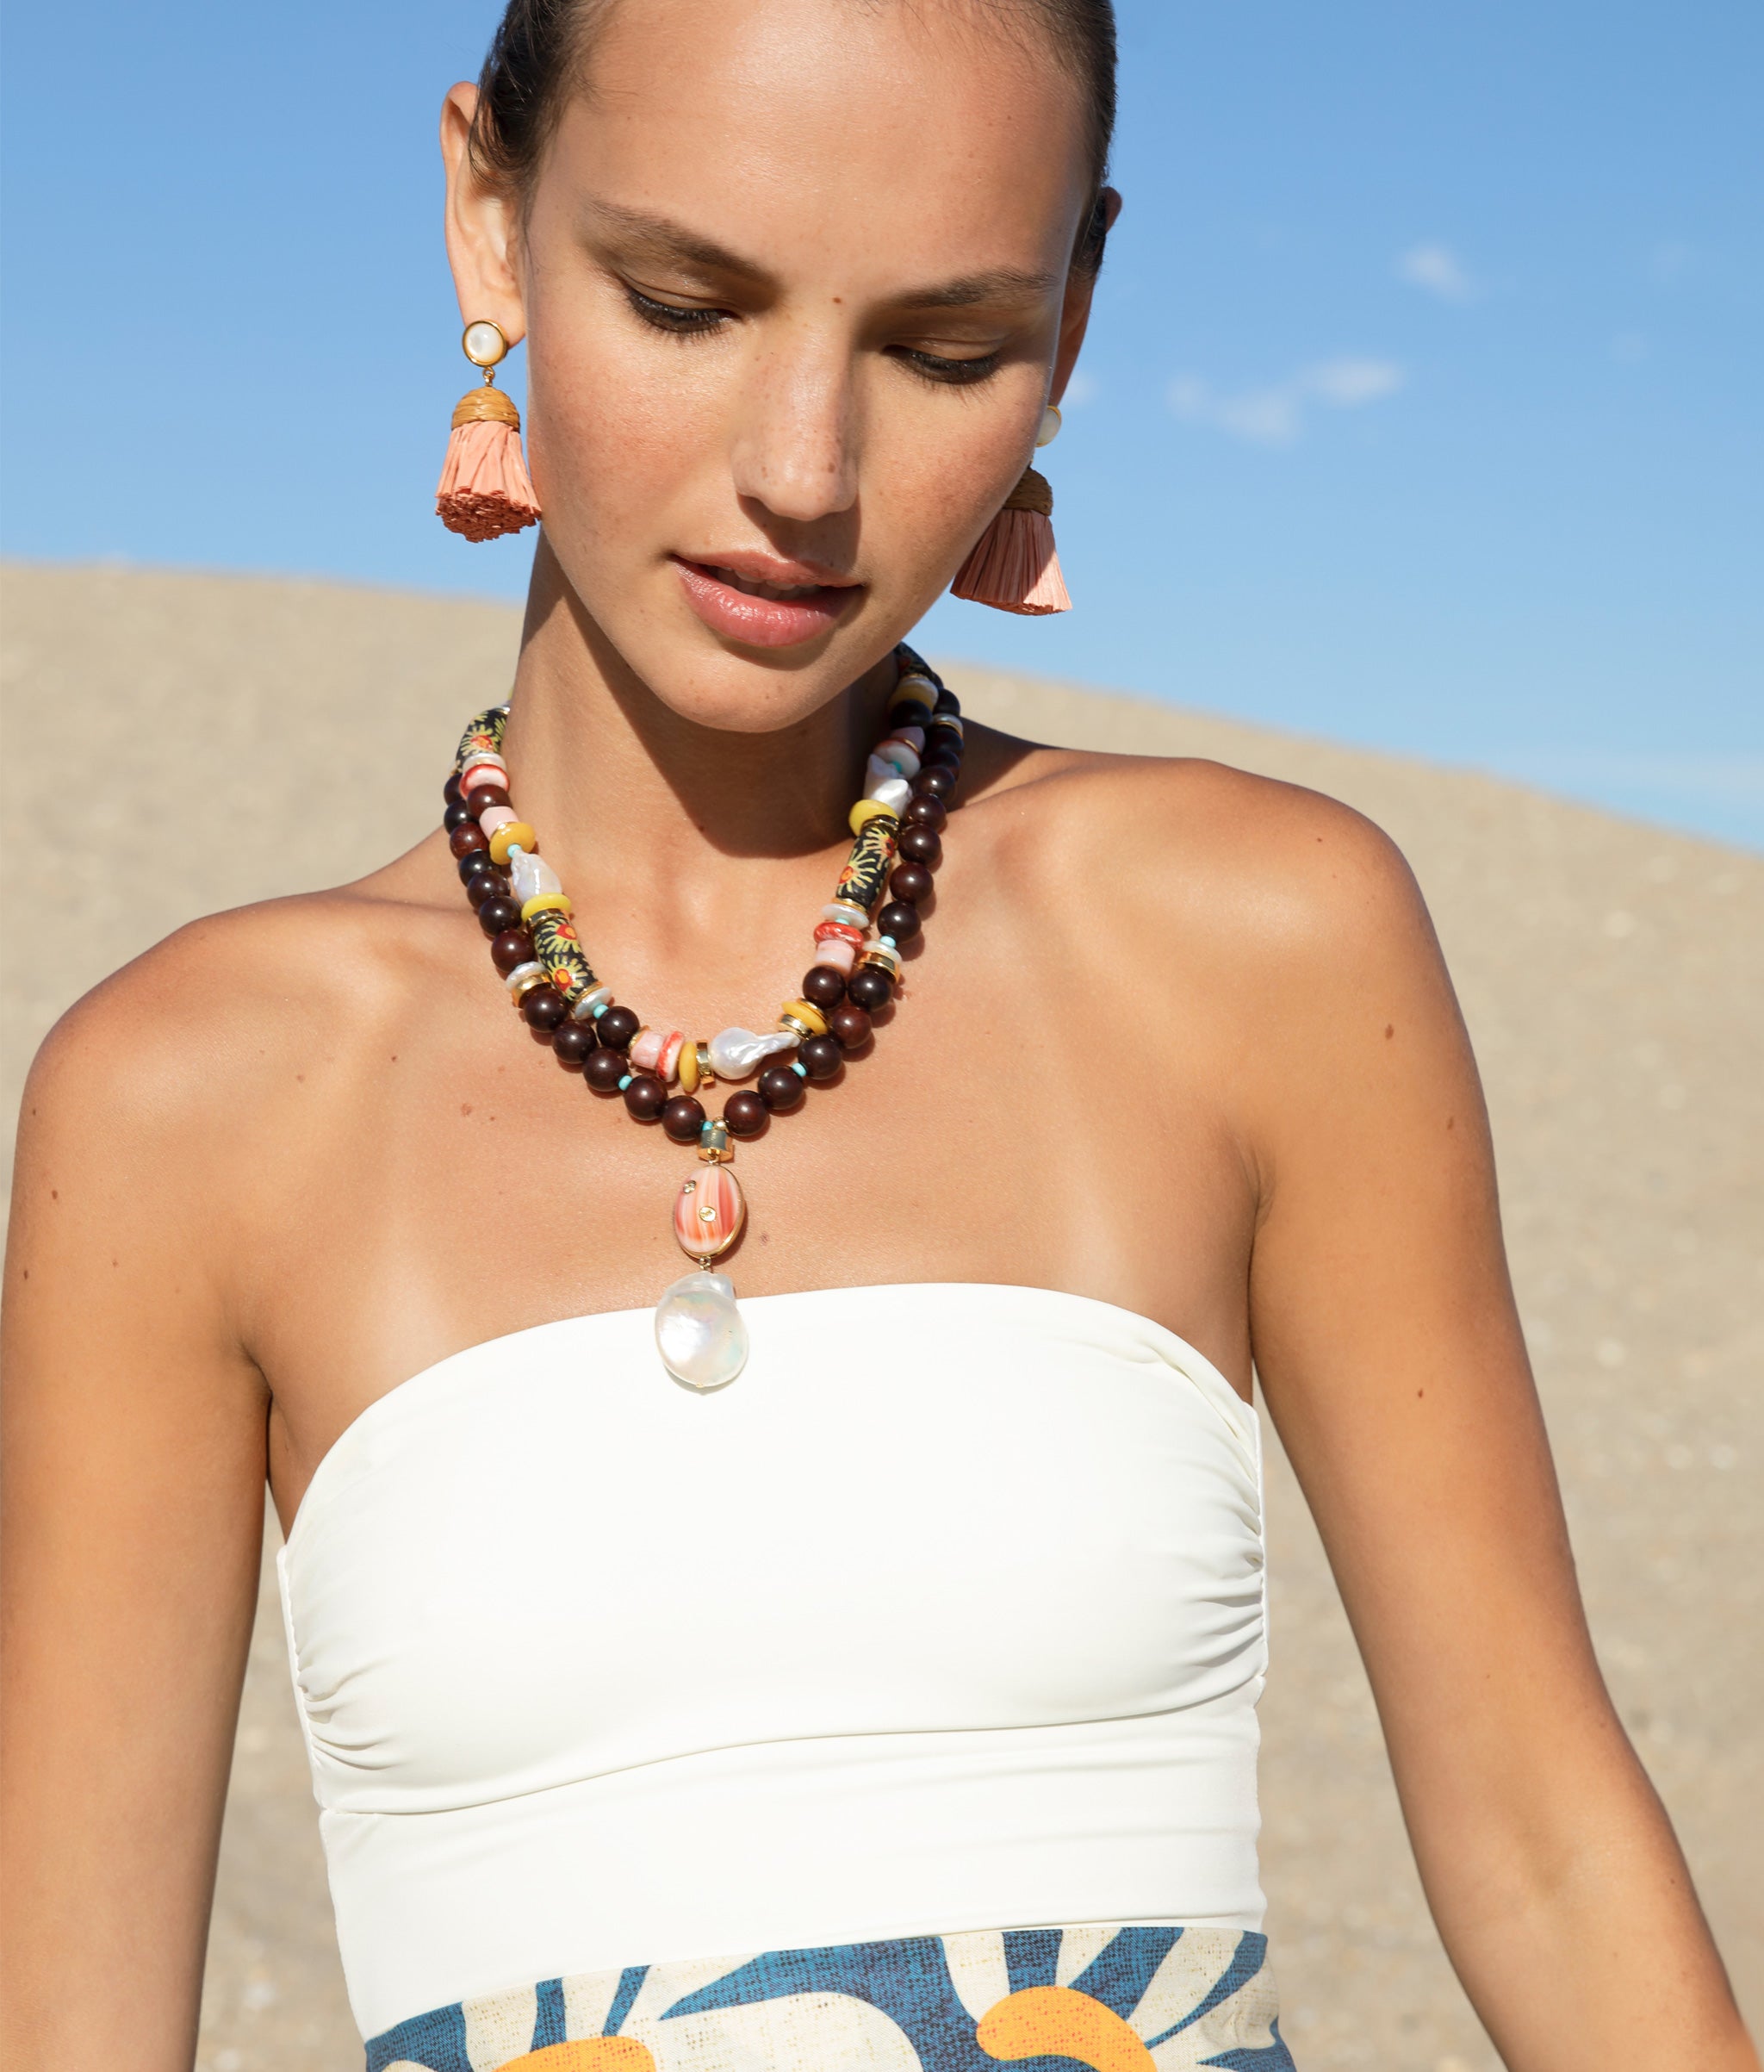 Model at the beach wearing the Raffia Earrings in Rose with the Gaia Necklace and the Souvenir Necklace in Tropic.